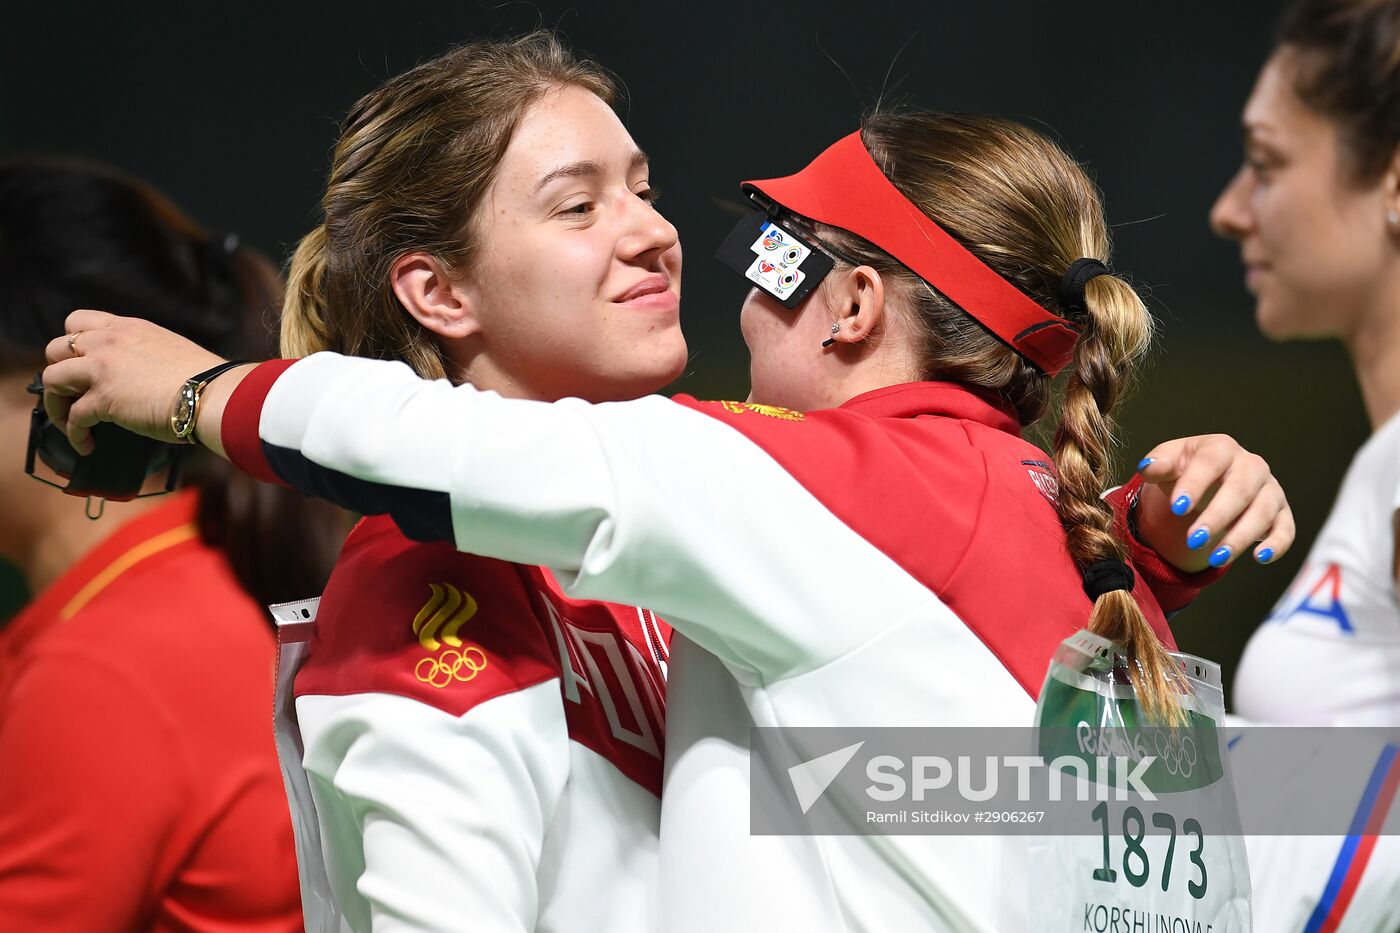 2016 Summer Olympics. Shooting sport. Women's trap and air pistol